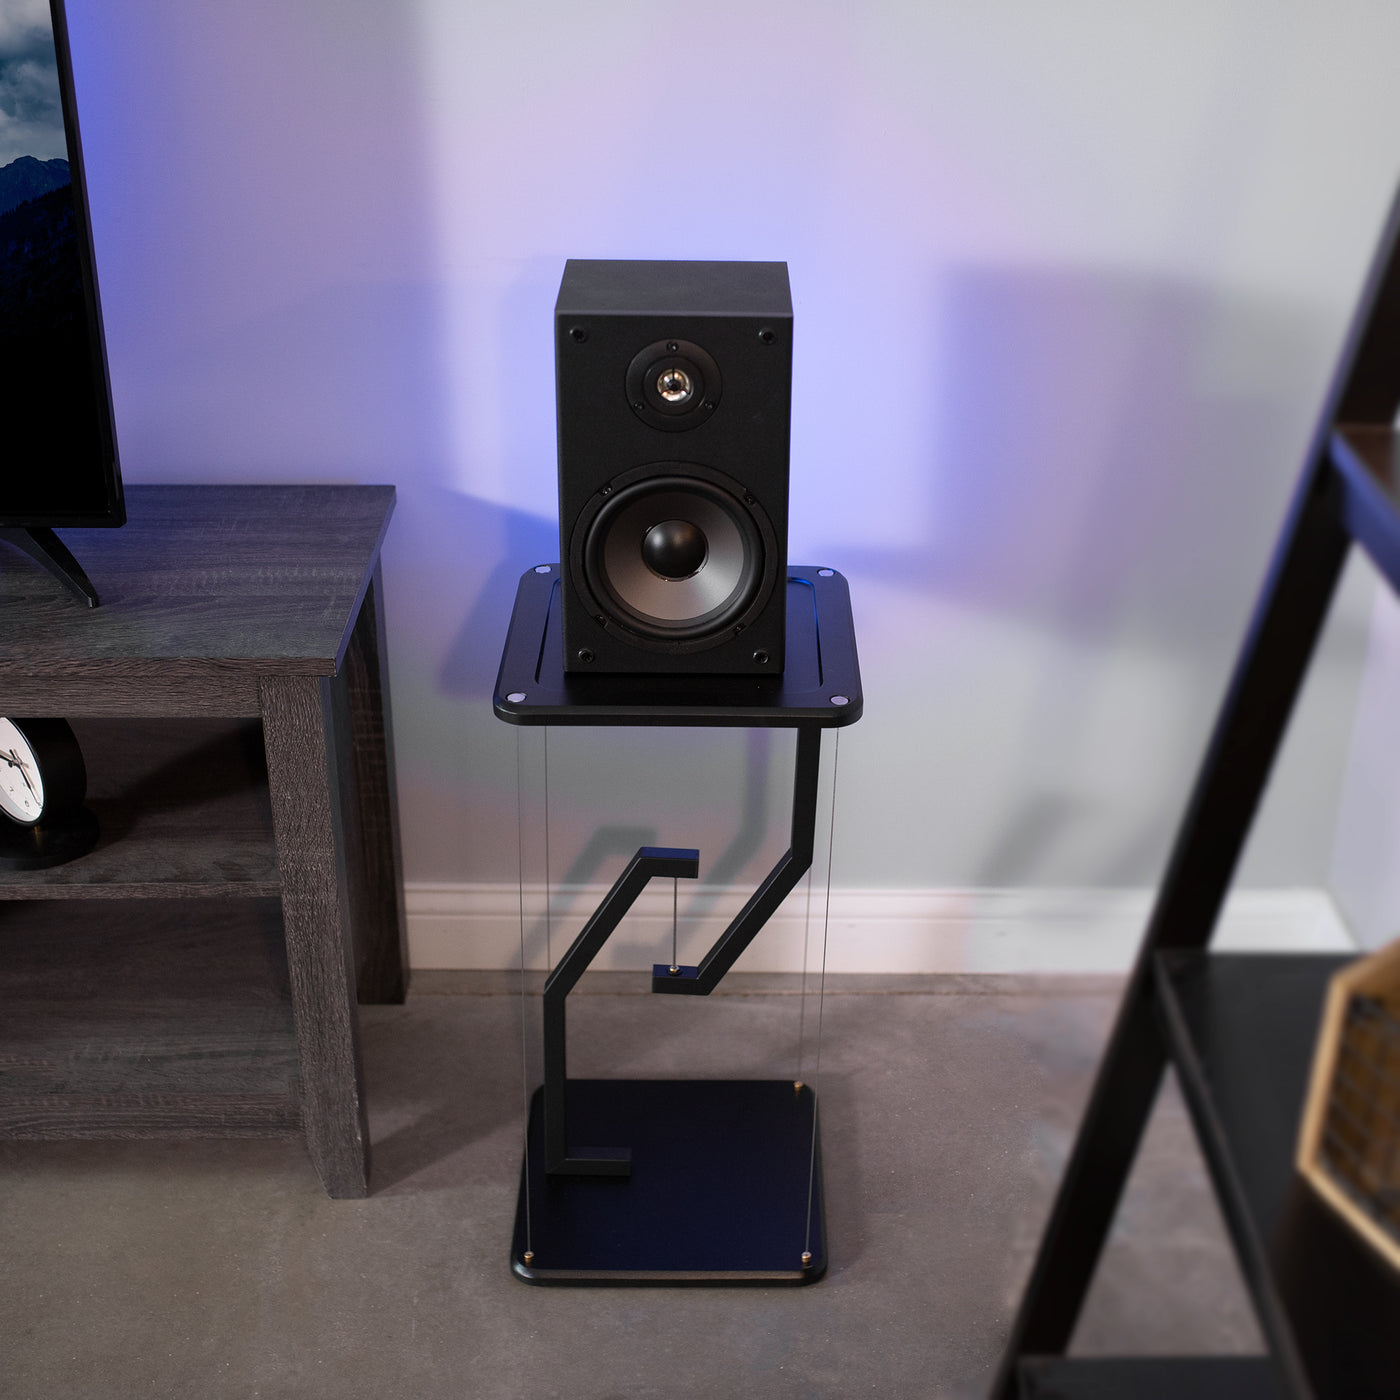 Floating speakers stand for improved sound and aesthetic appeal.